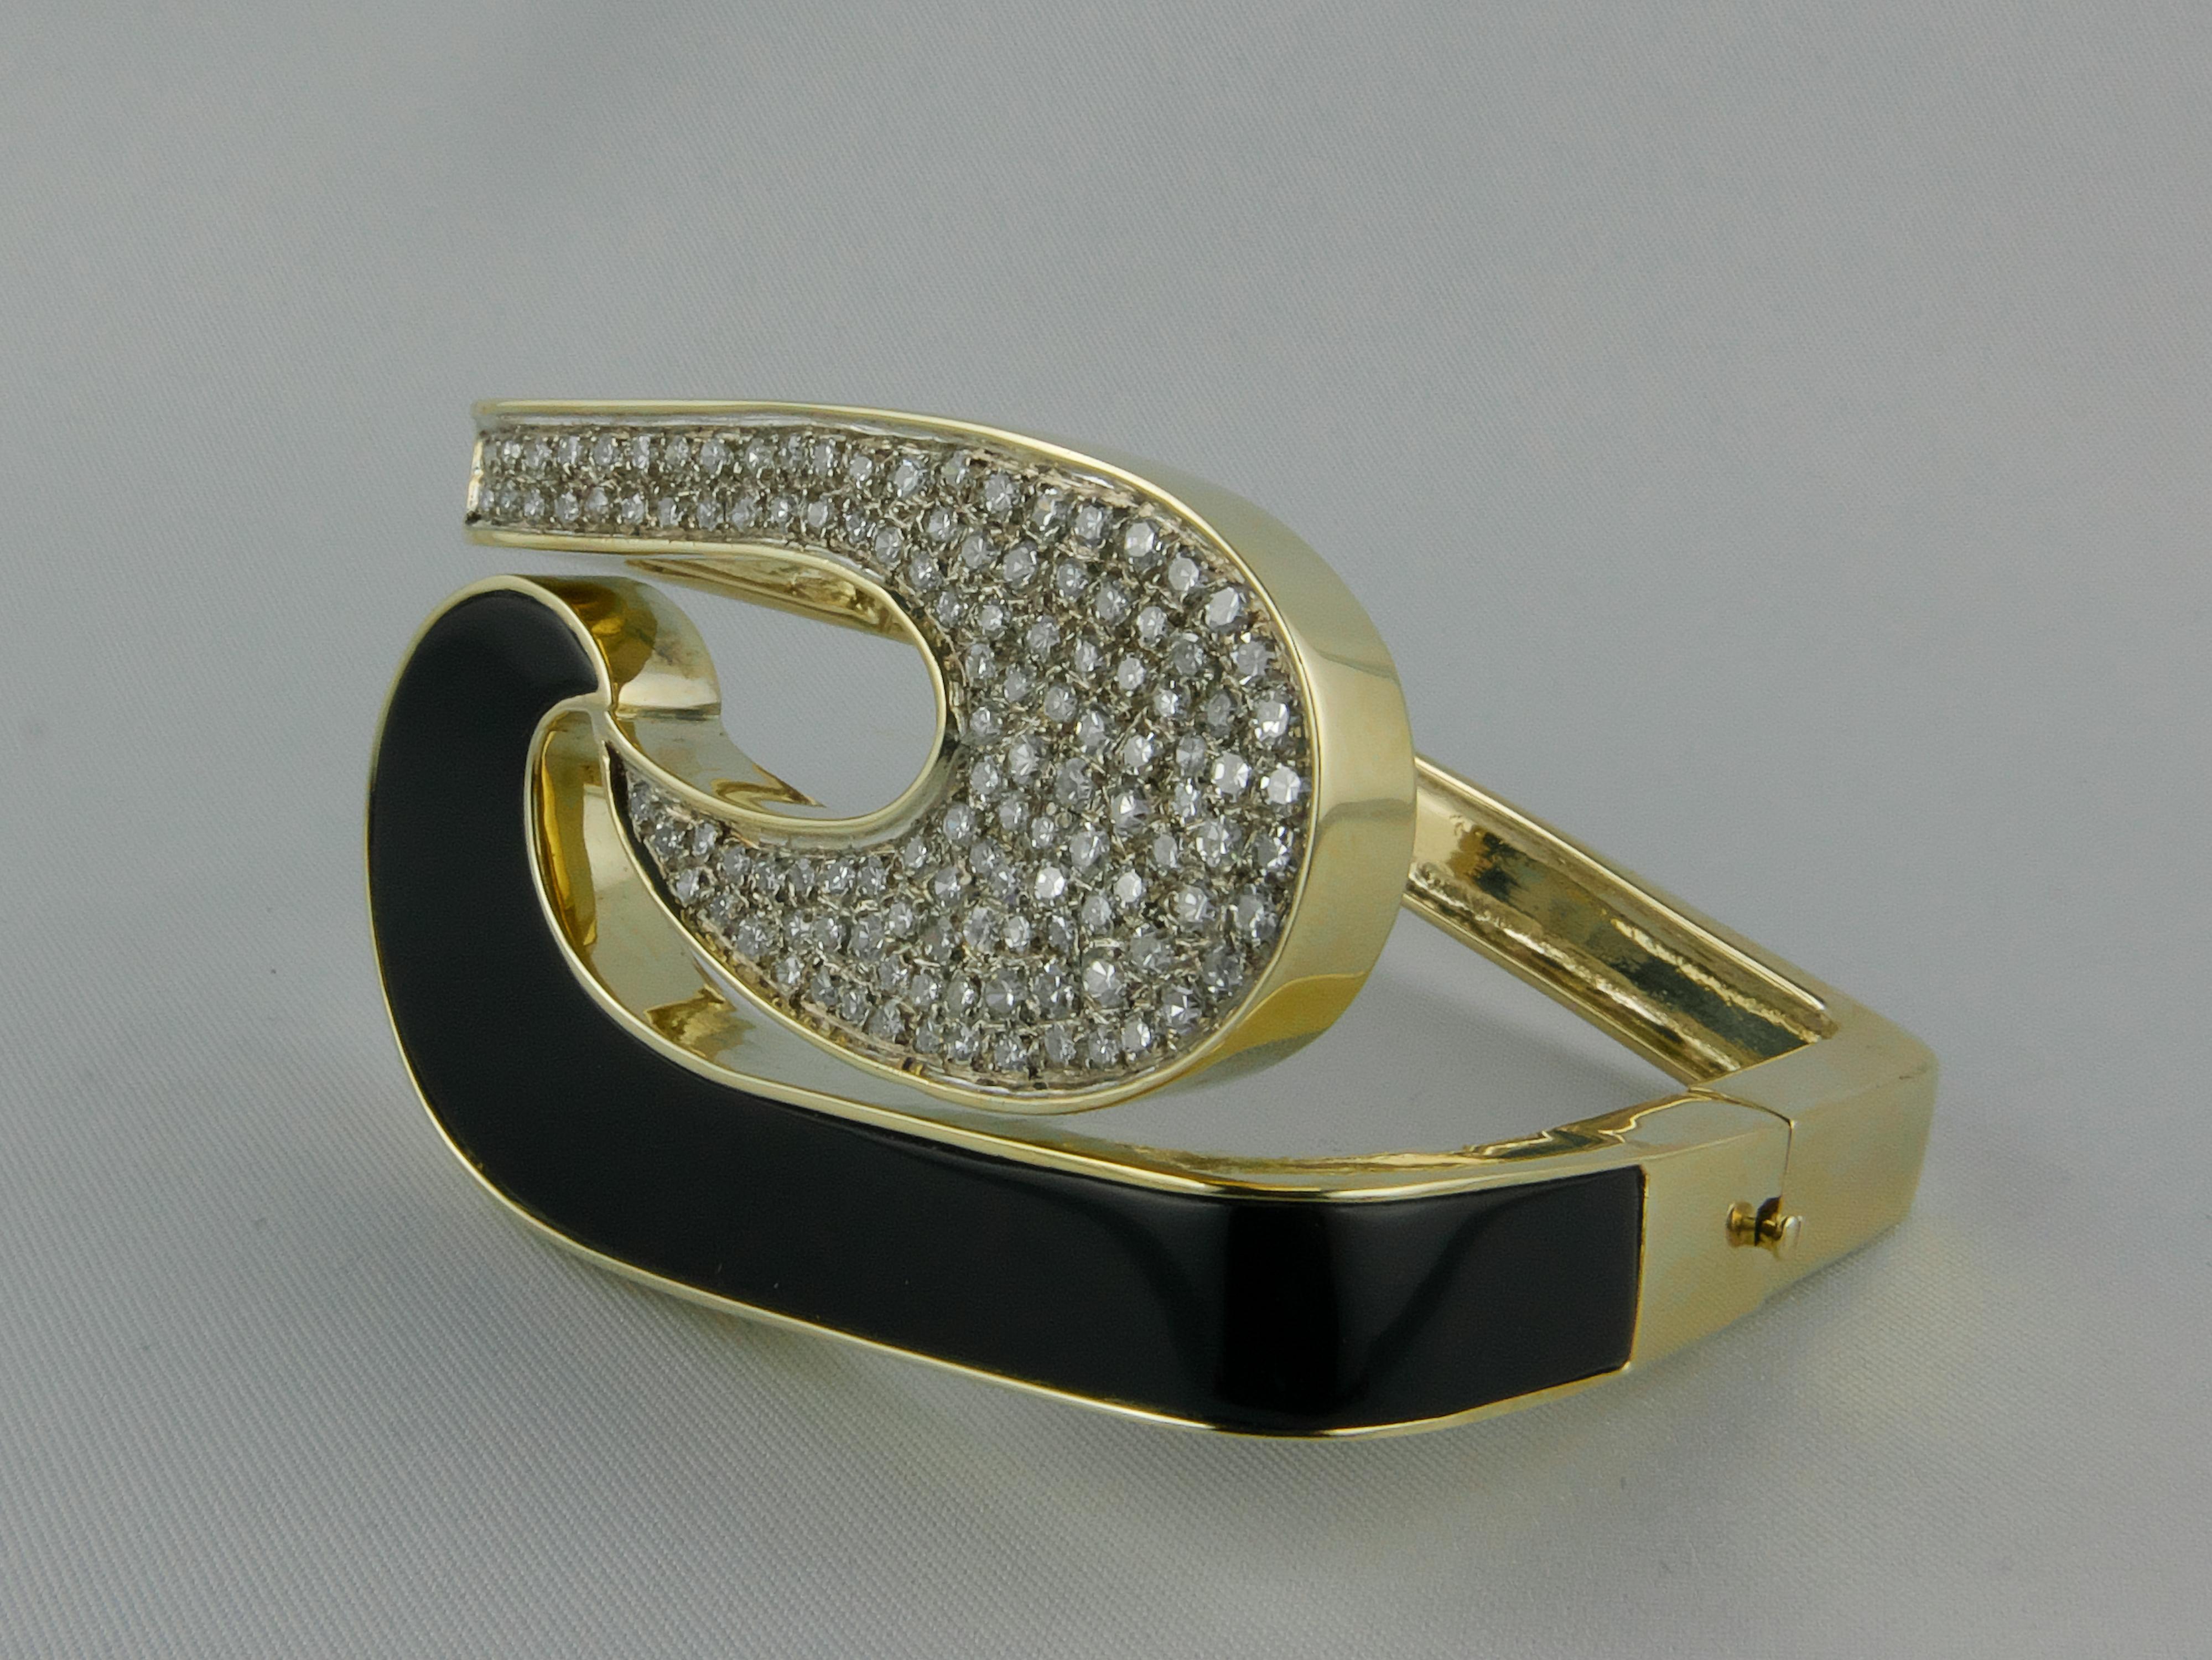 This stylish and glamourous 1970s Bracelet is finely crafted in 14k Yellow Gold with an Onyx insert and a  Diamond pavé set with approx. 4.5 cts  in a sculptural contrarié design. The Onyx  gives a sleek and sophisticated look to this